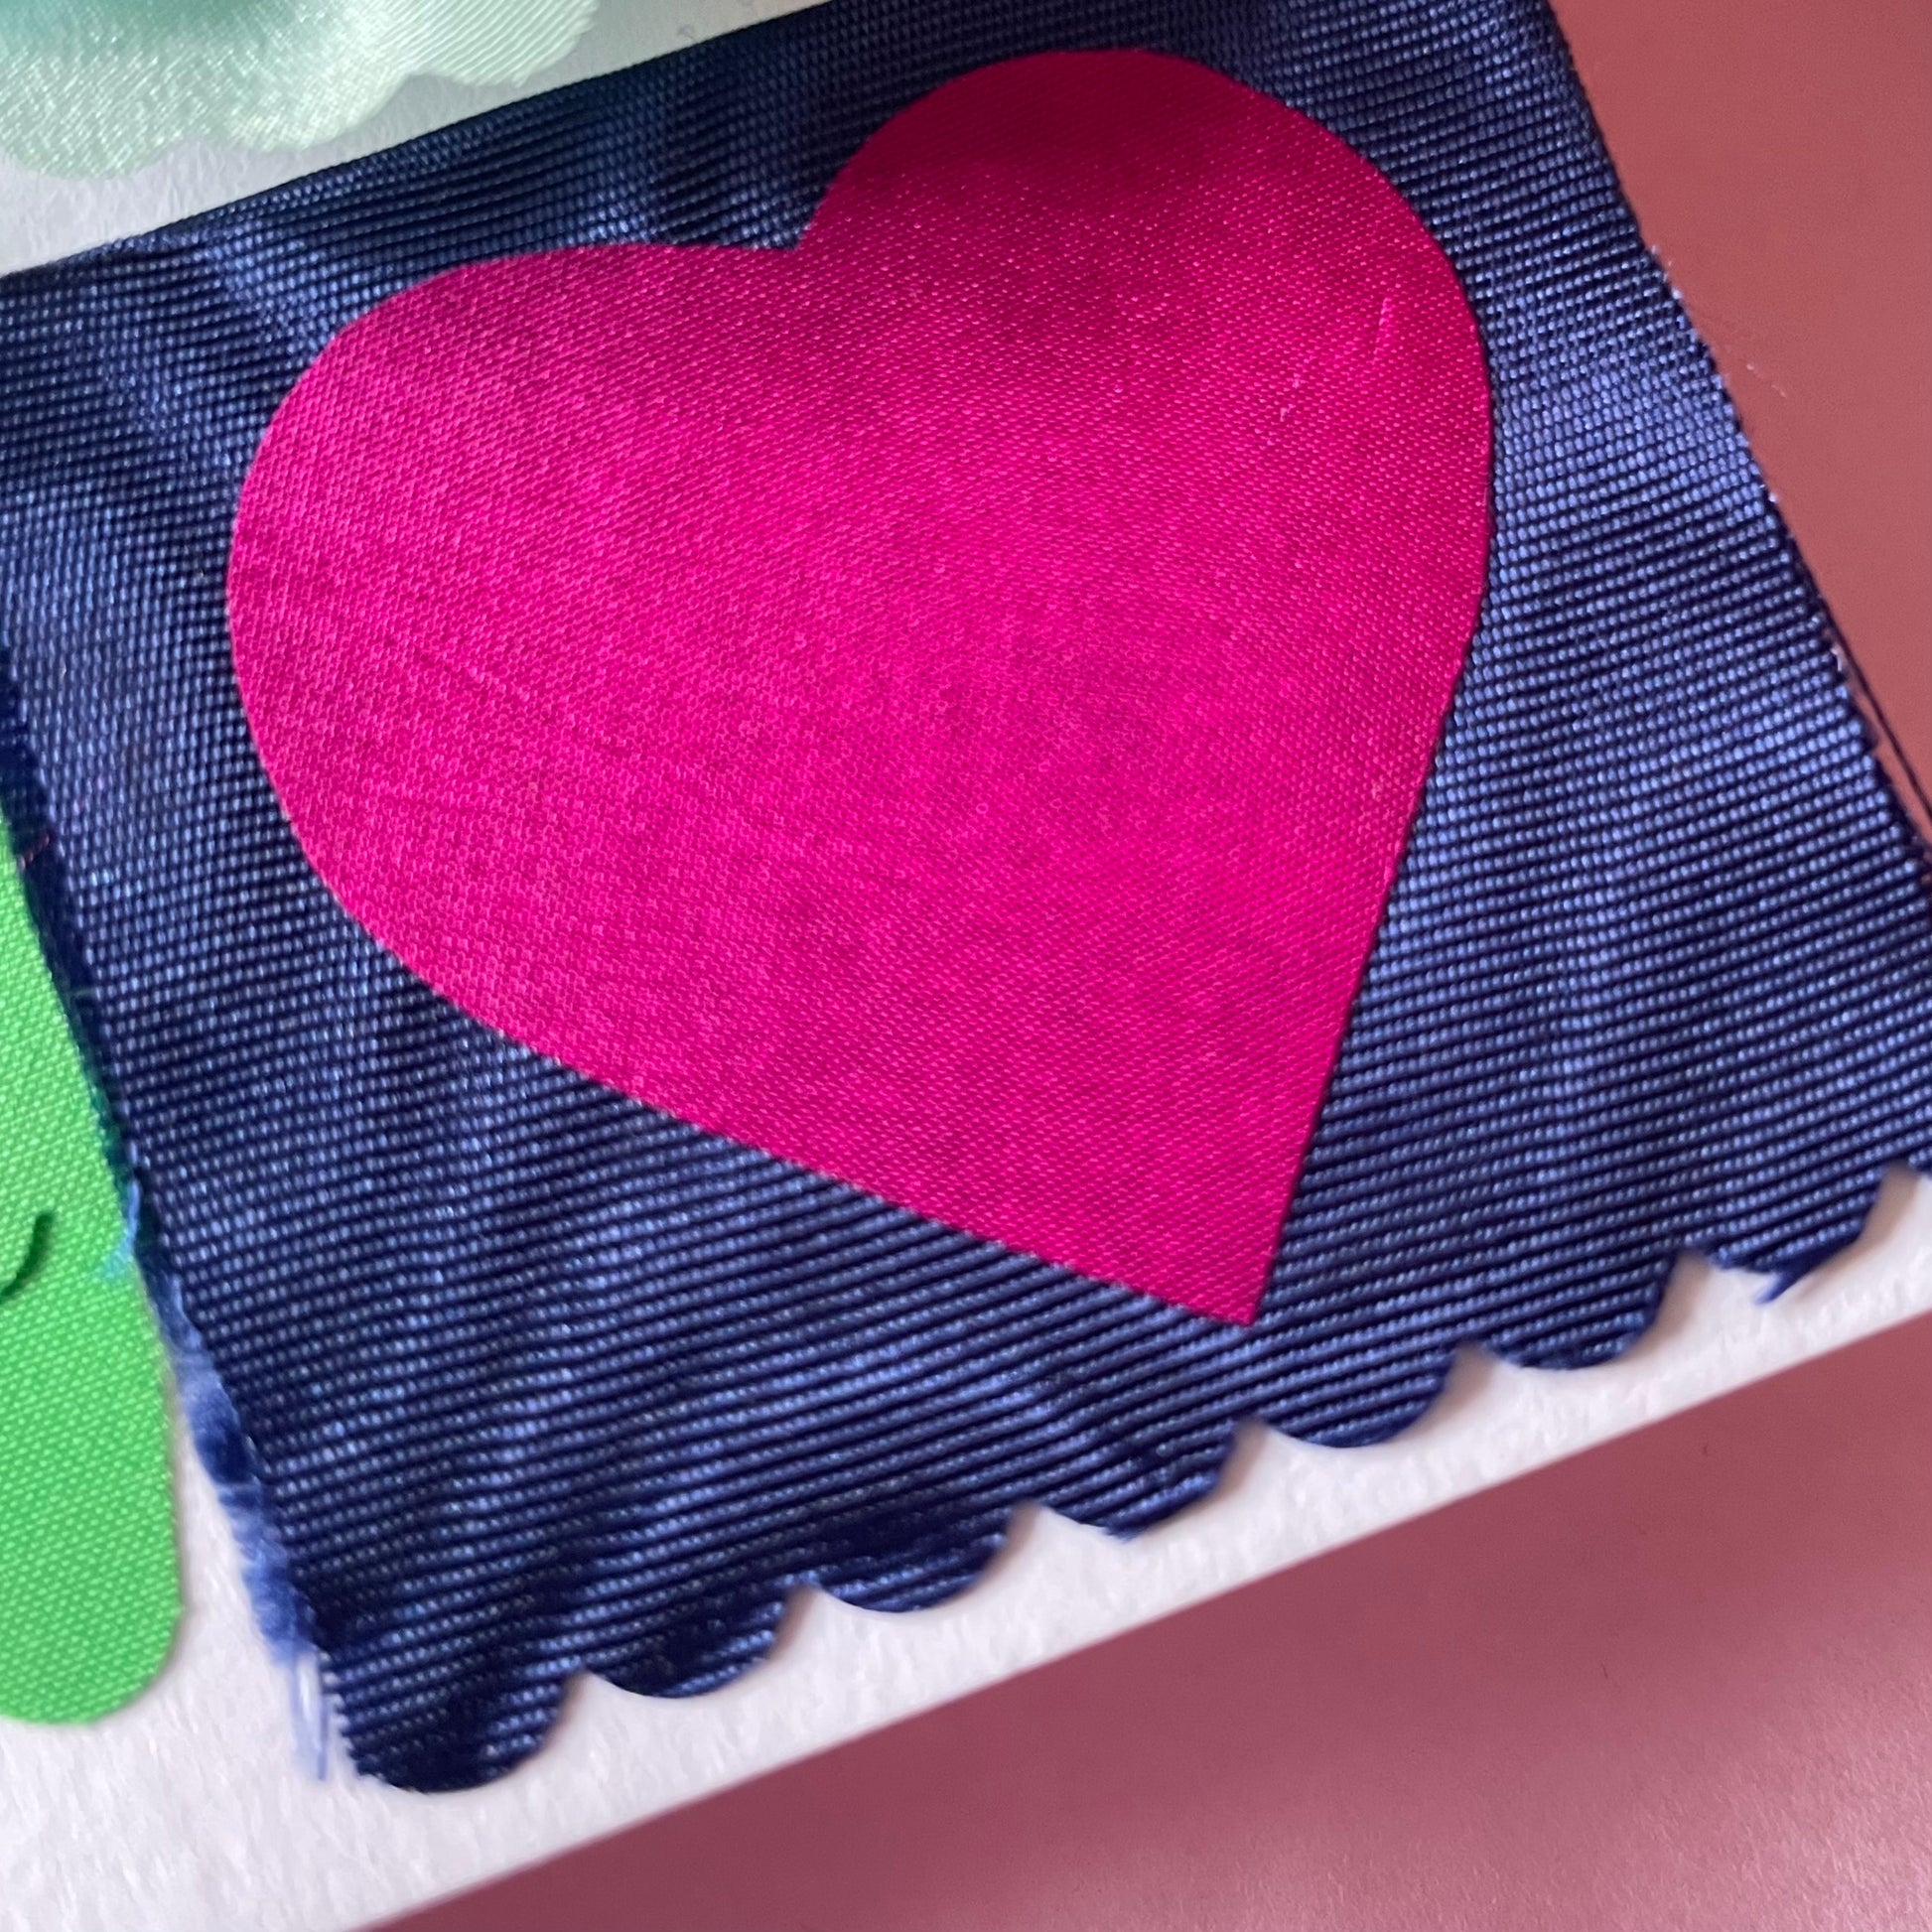 Close-up of the moire blue fabric with a hot pink heart fabric on top